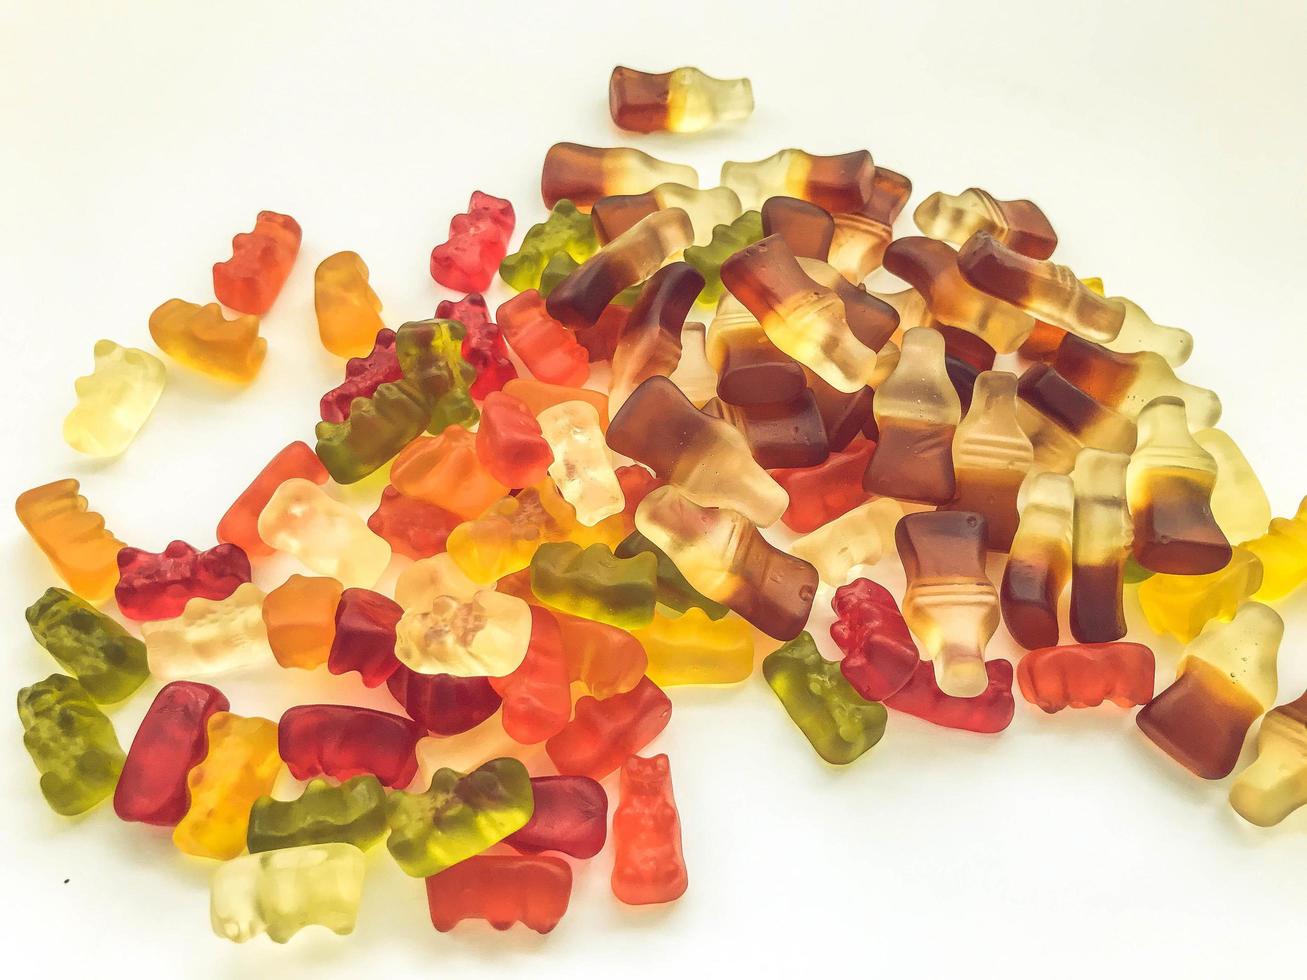 bright, tasty, unusual gummies made from gelatin of various shapes. colored candy made from fruits. delicious dessert folded on the background photo